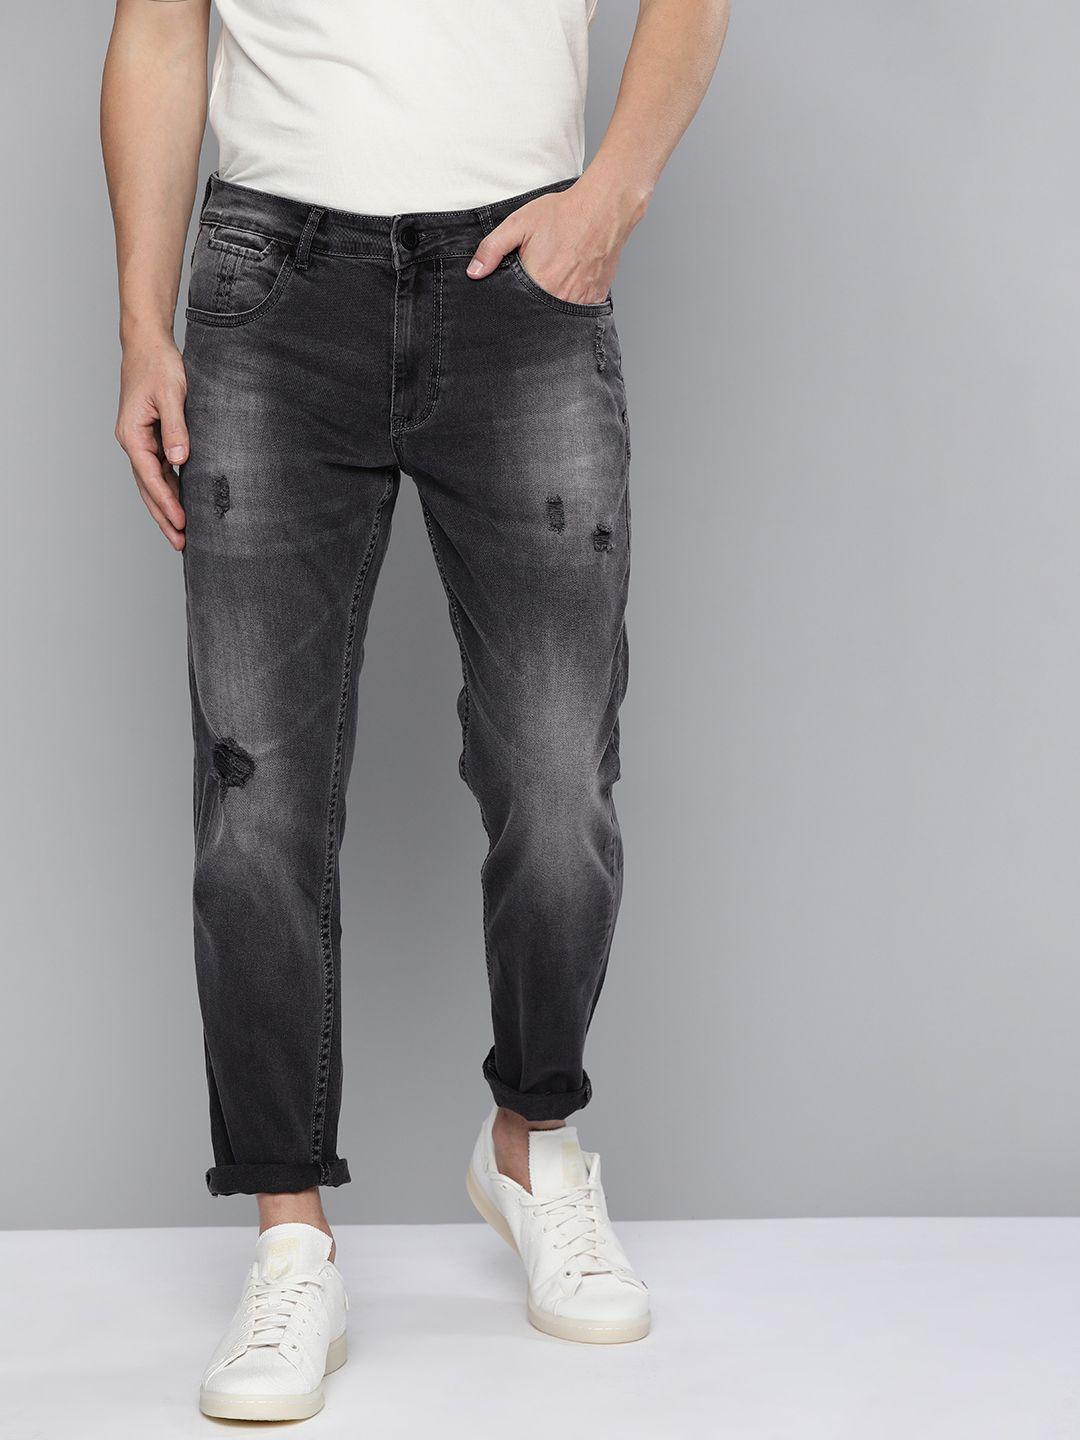 mast & harbour men black carrot fit mildly distressed heavy fade stretchable jeans